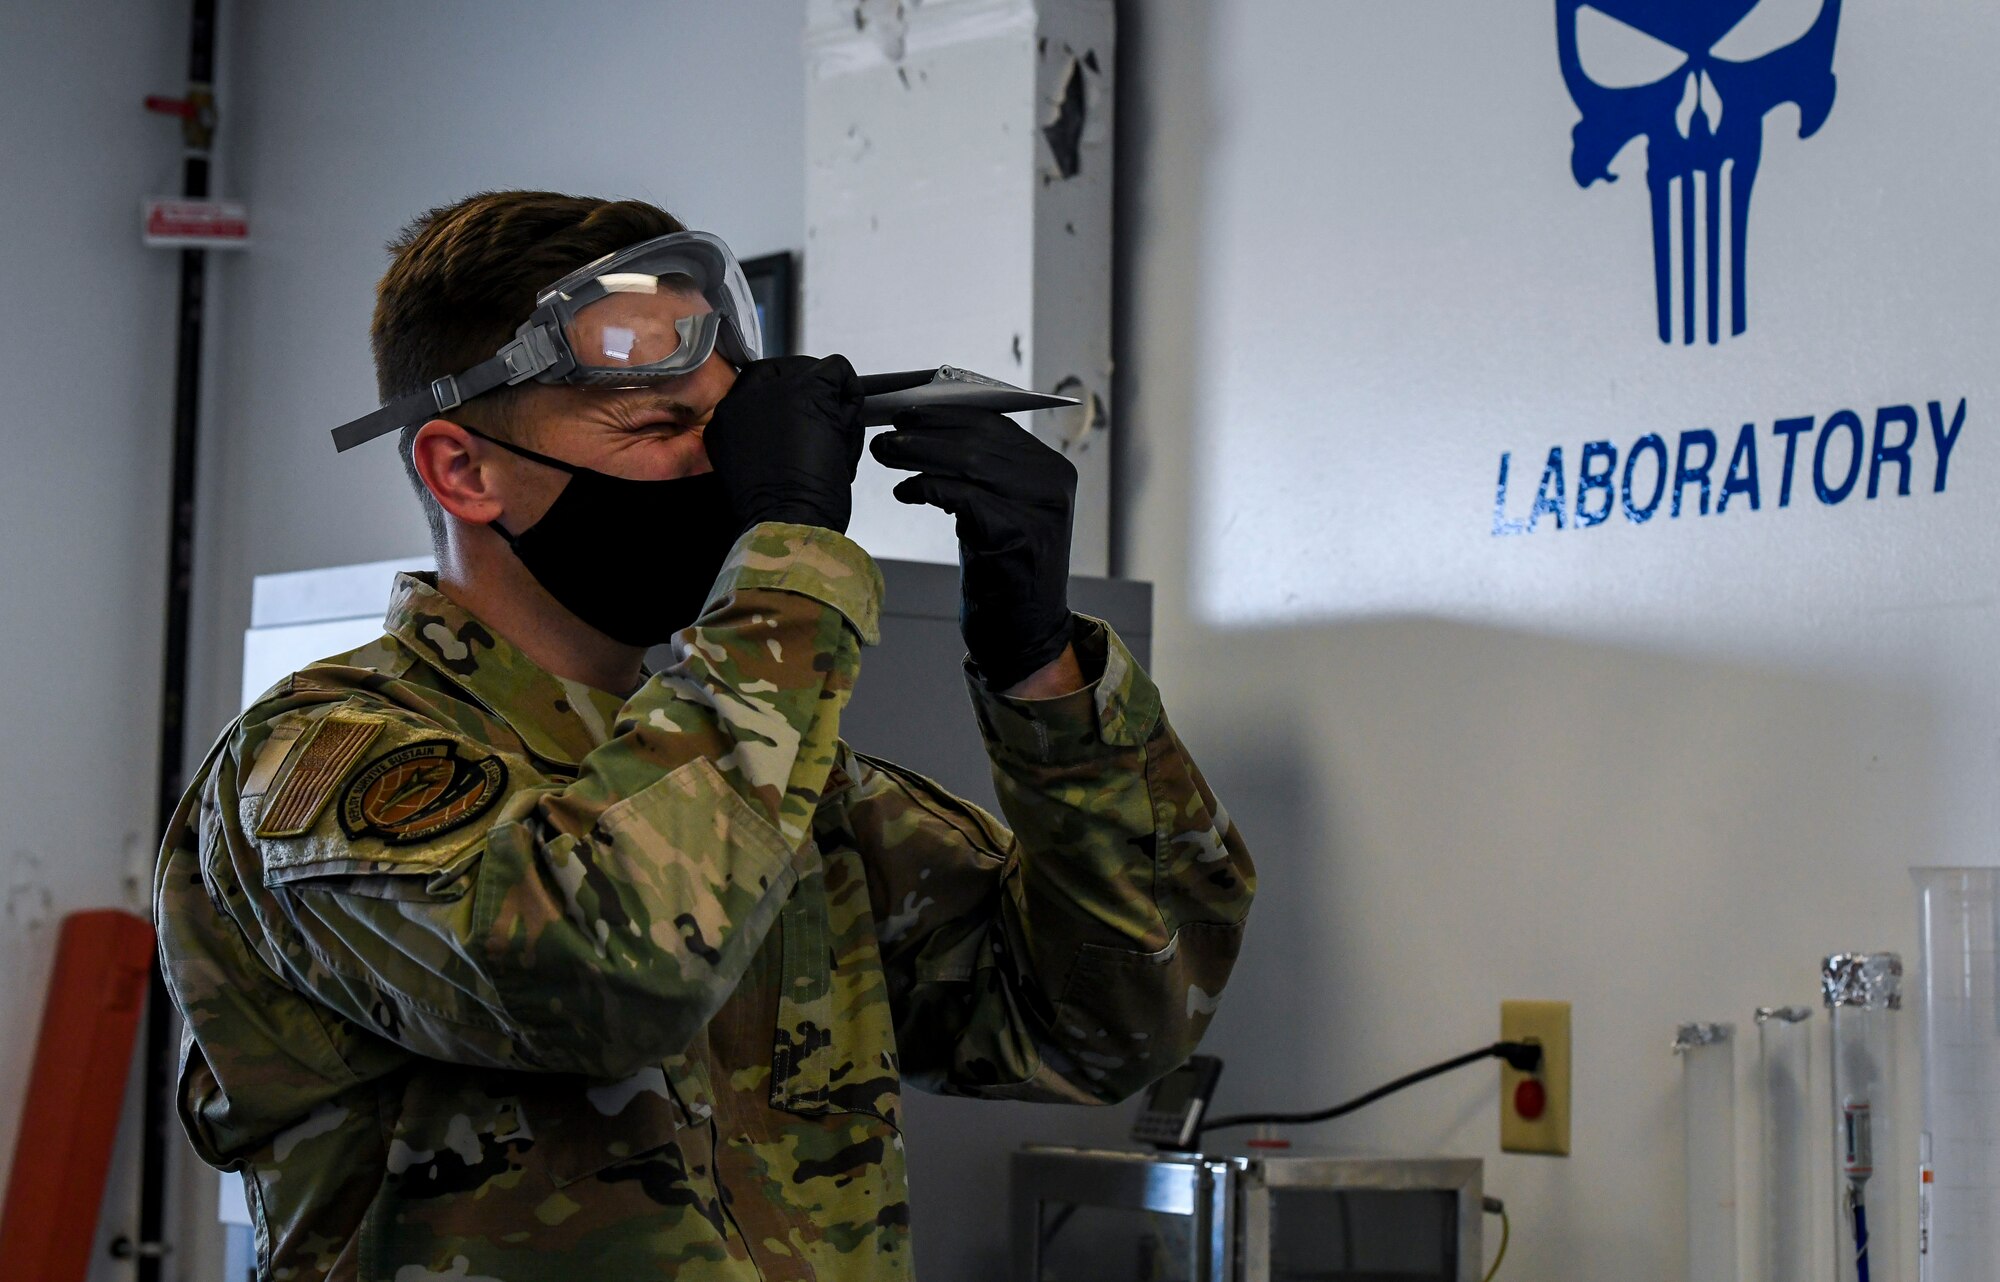 Staff Sgt. Brian Elrod, 436th Logistics Readiness Squadron fuels laboratory noncommissioned officer in charge, looks through a refractometer to inspect the water content from a fuel sample at Dover Air Force Base, Delaware, Jan. 12, 2021. The refractometer measures the effectiveness of additives by separating water in the fuel. (U.S. Air Force photo by Airman 1st Class Stephani Barge)